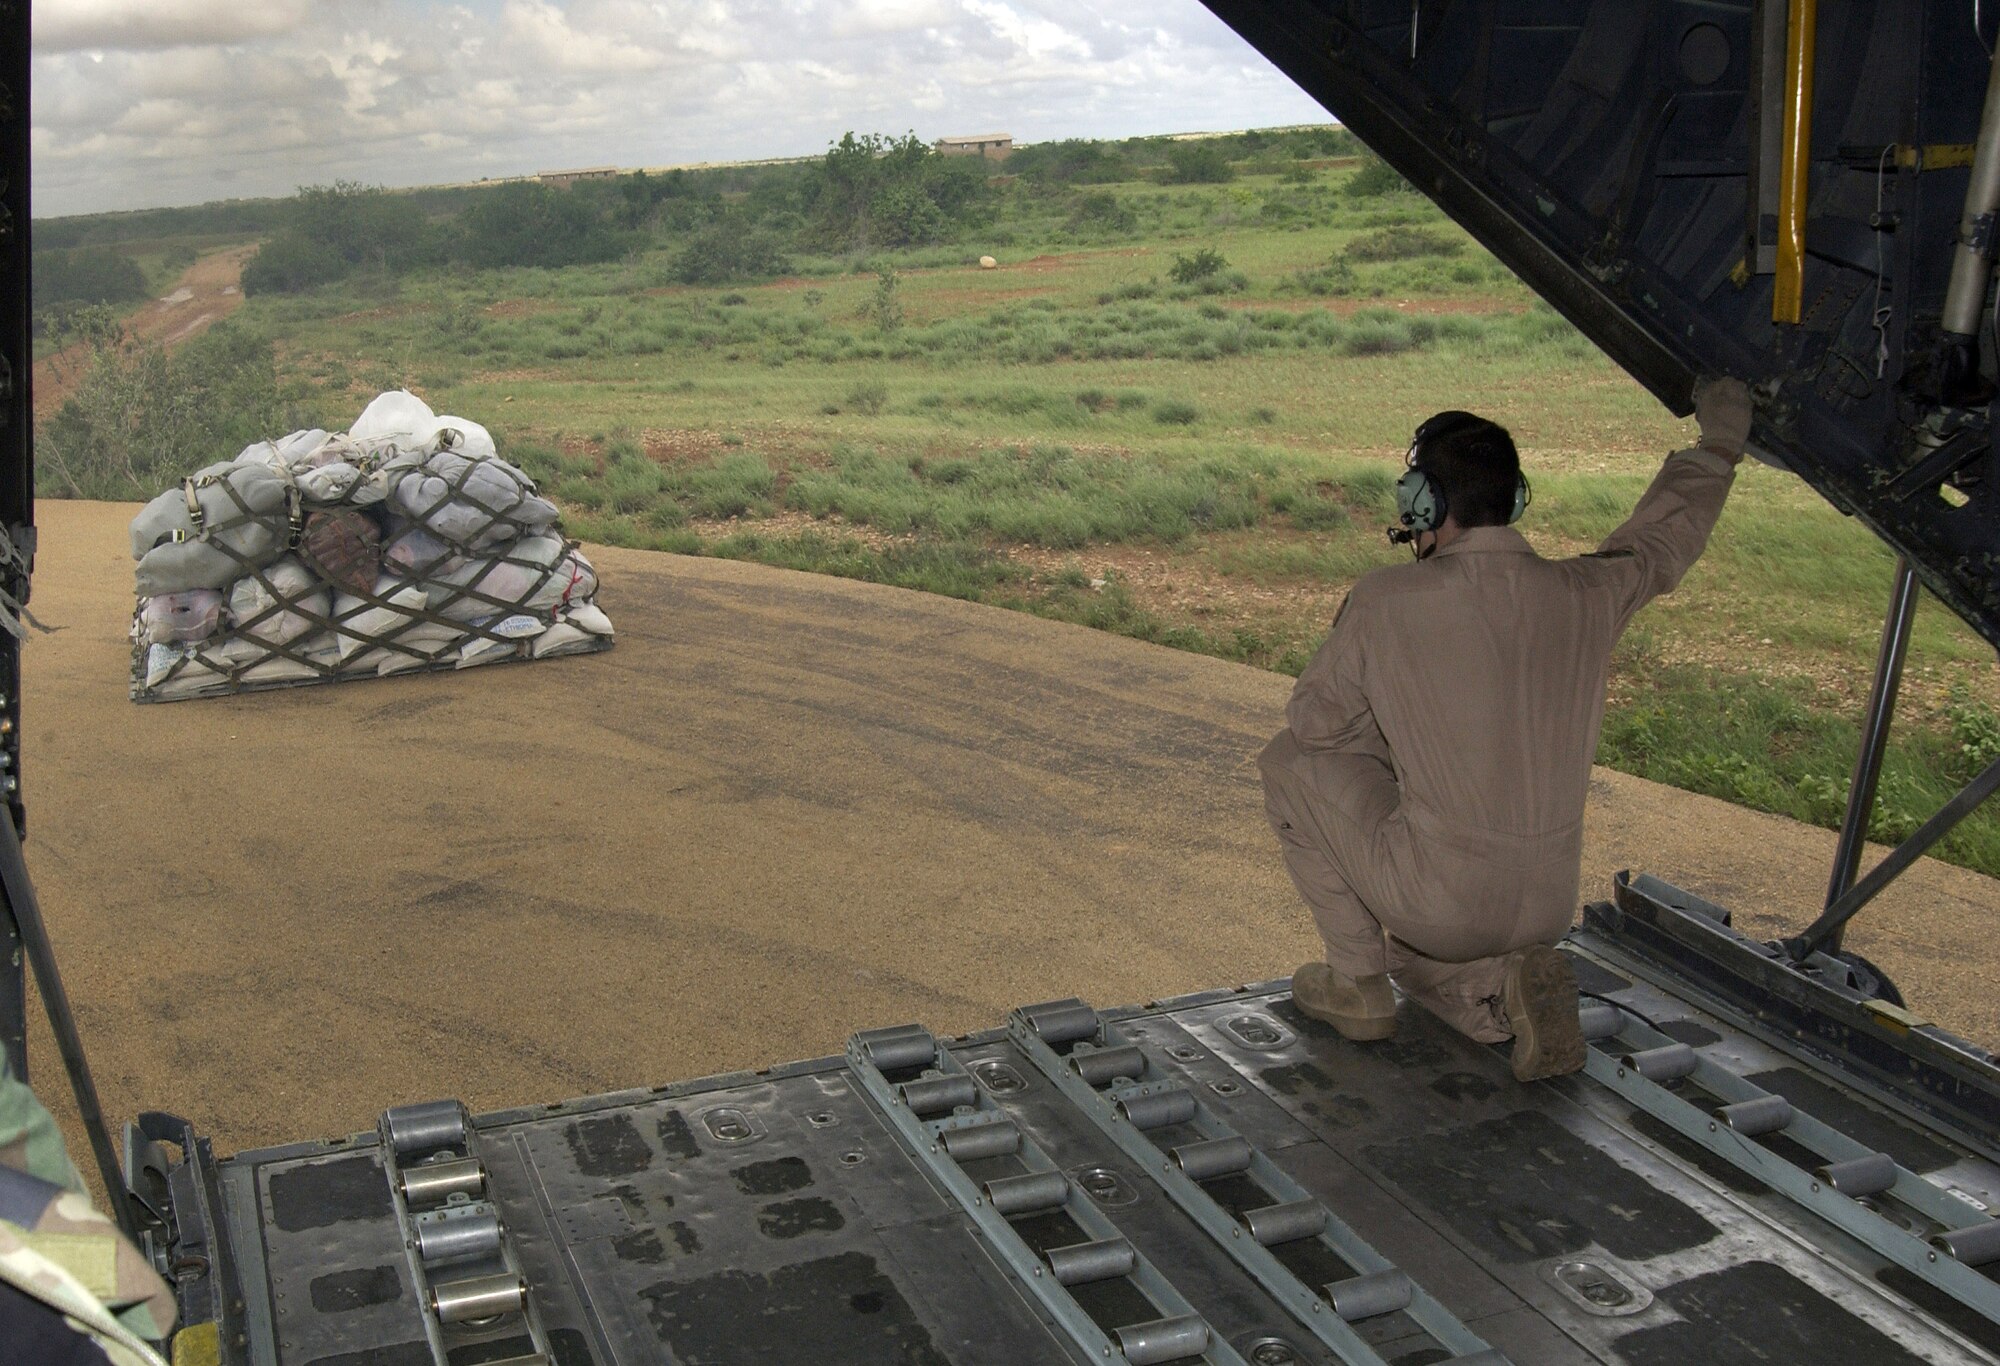 C-130 Hercules assigned to Combined Joint Task Force - Horn of Africa delivered humanitarian aid to flood victims in the Ogaden region of Ethiopia Nov. 10. (U.S. Navy photo/Master Chief Petty Officer Philip A. Fortnam)

